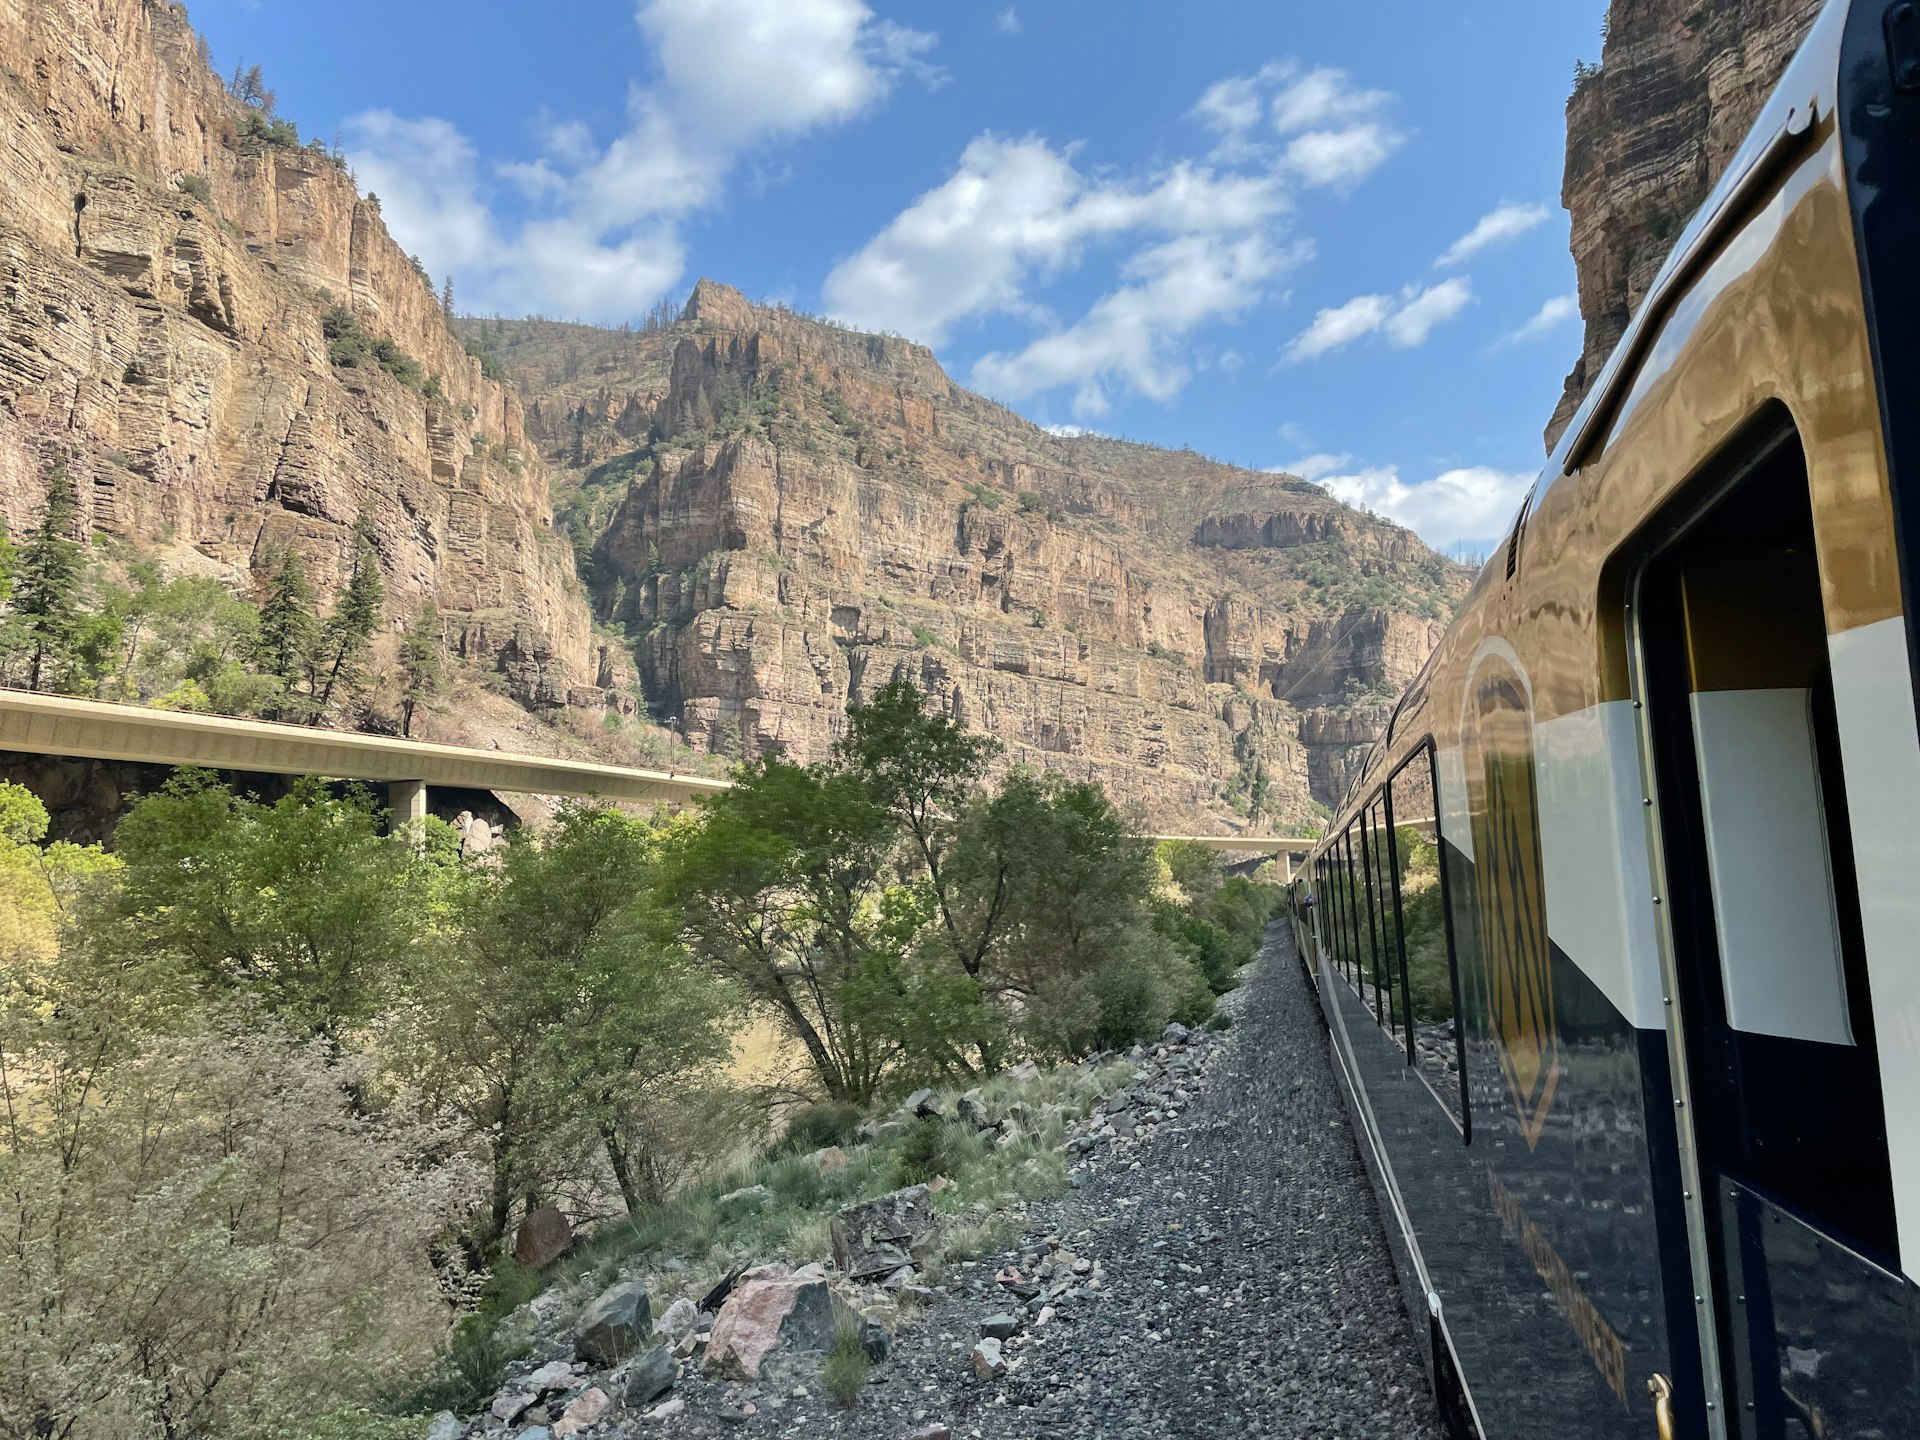 A deep canyon seen from a train